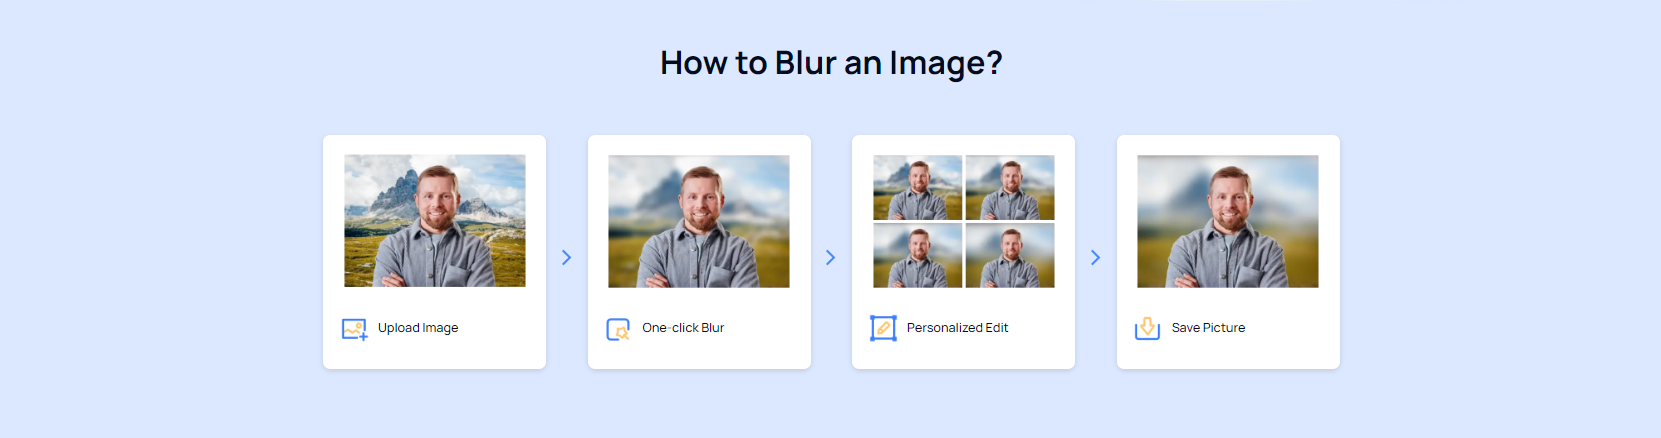 how to blur images